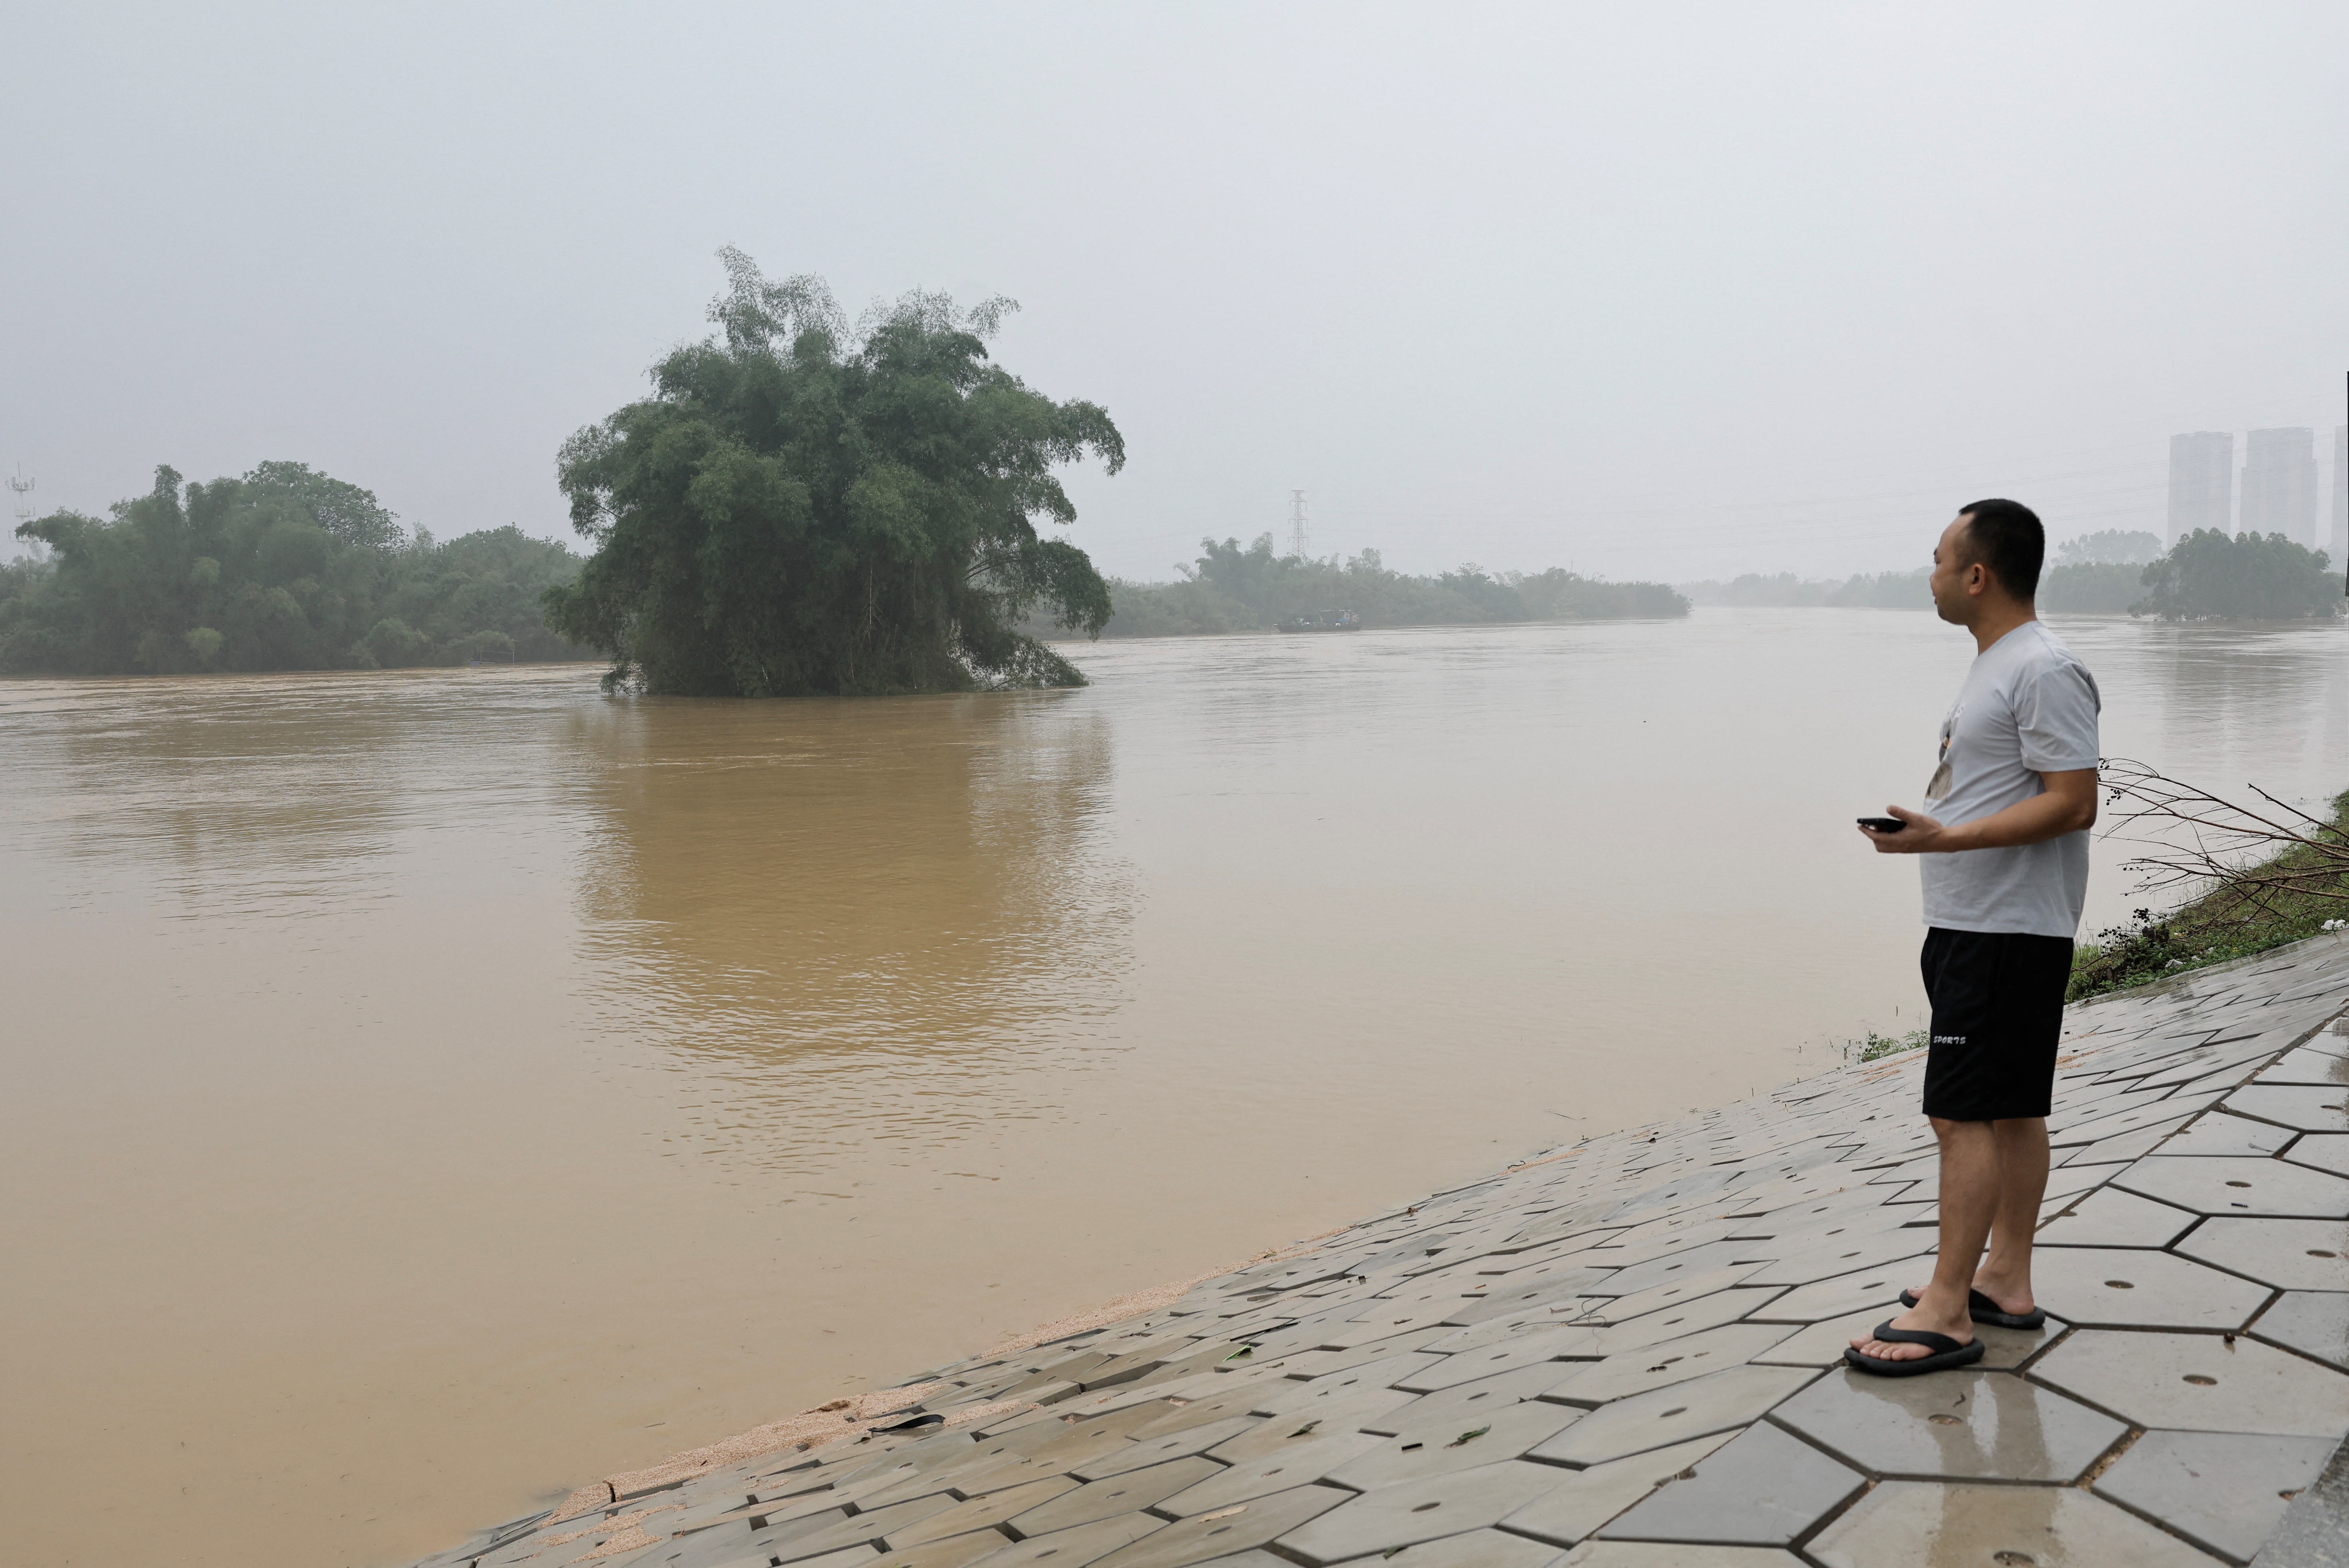 Resident looks on as he stands near a flooded river following heavy rainfall in Qingyuan, Guangdong